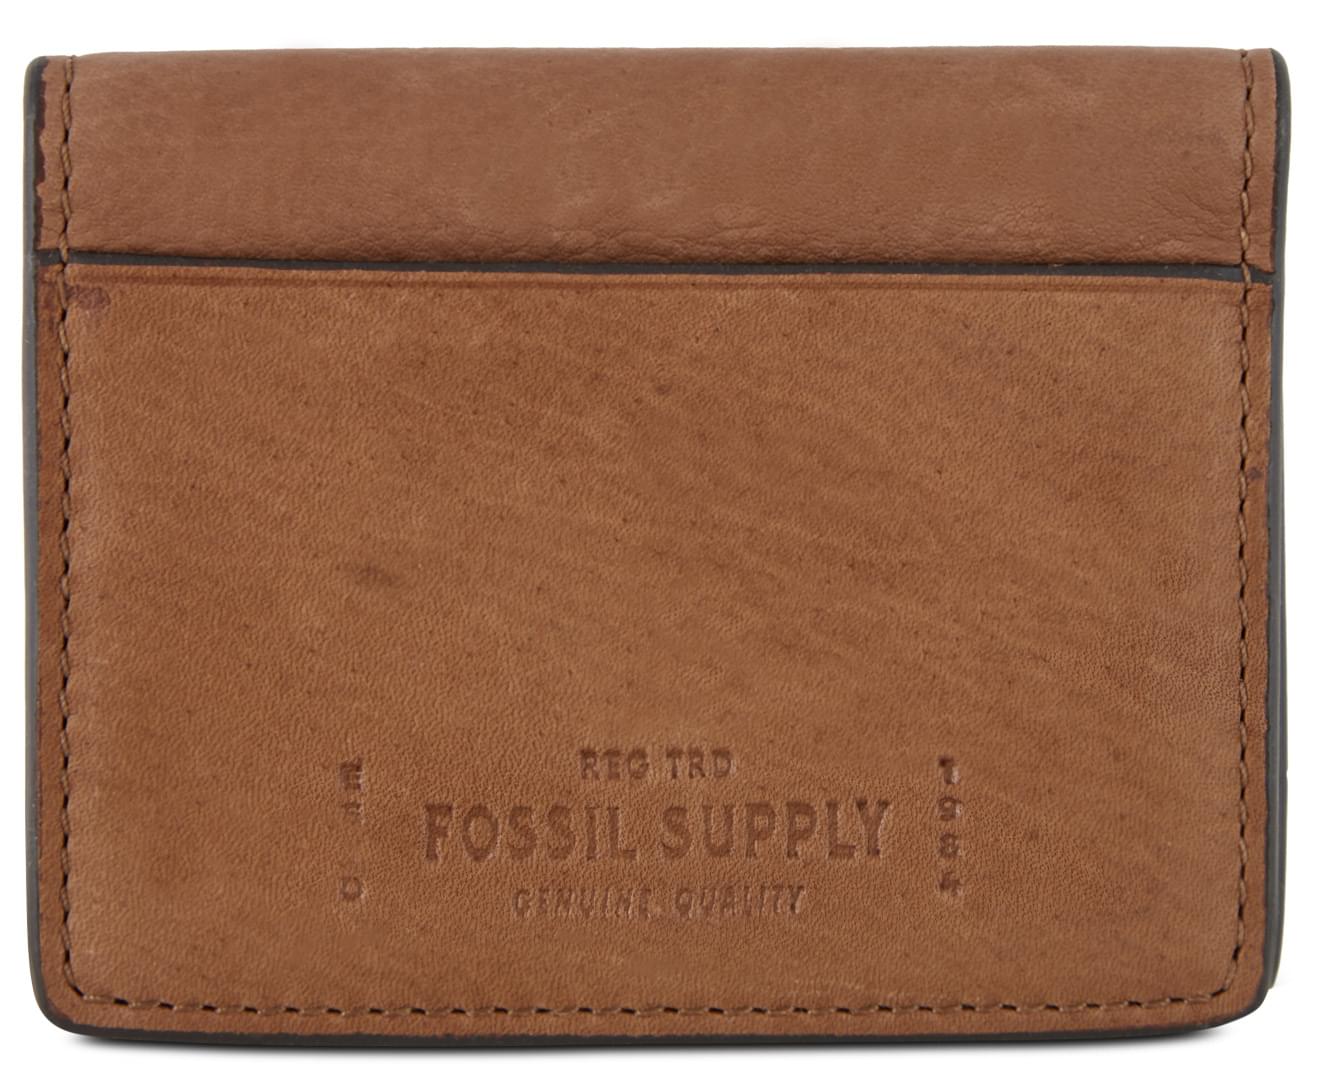 Fossil Gregg SML1756210 Magnetic Leather Card Case In Medium Brown